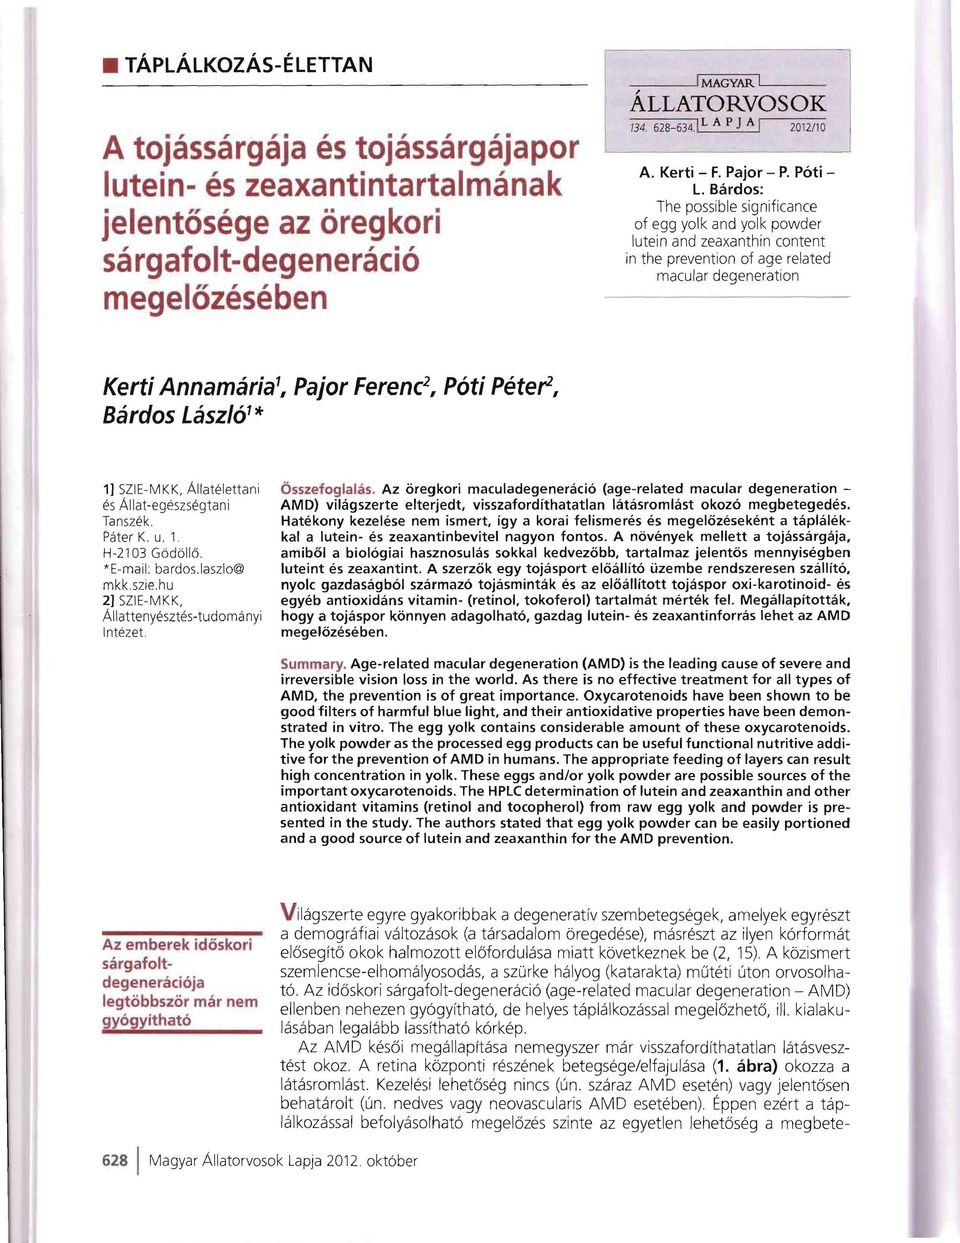 Bardos: The possible significance of egg yolk and yolk powder lutein and zeaxanthin content in the prevention of age related macular degeneration Kerti Annamaria', Pajor Ferenc 2, P6ti Peter2, Bardos